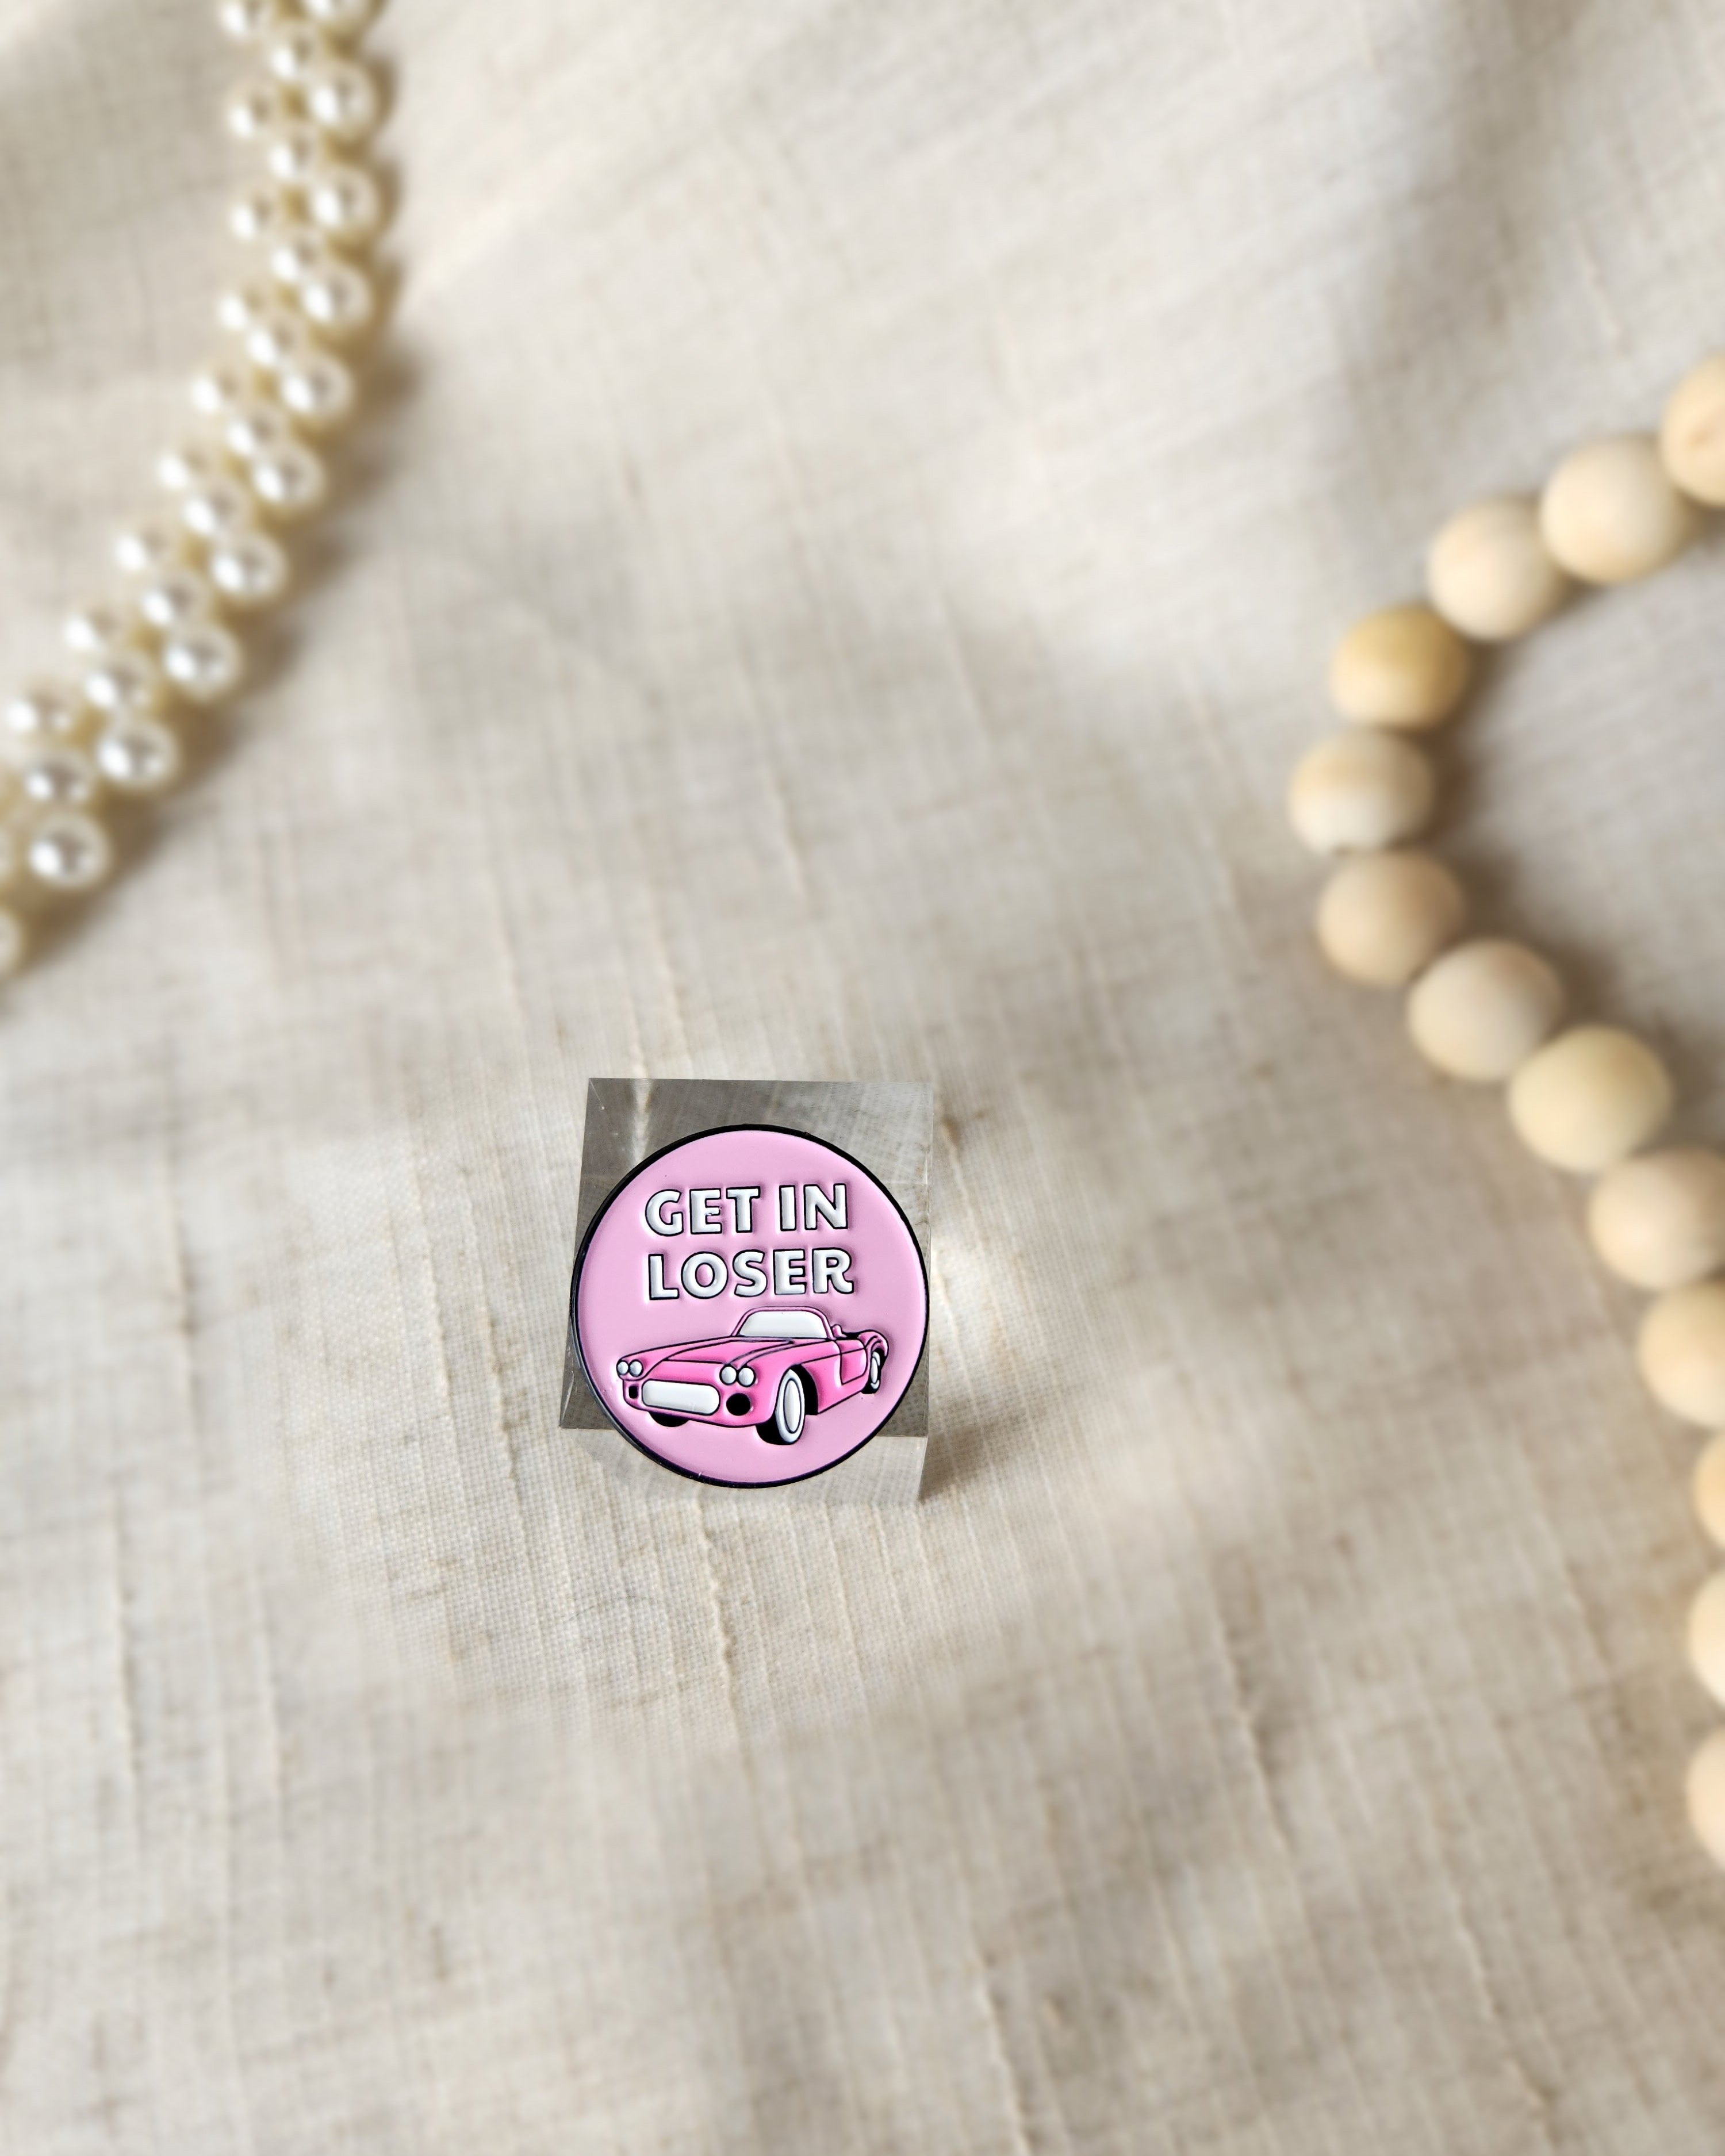 Get in Loser Mean Girls Pin